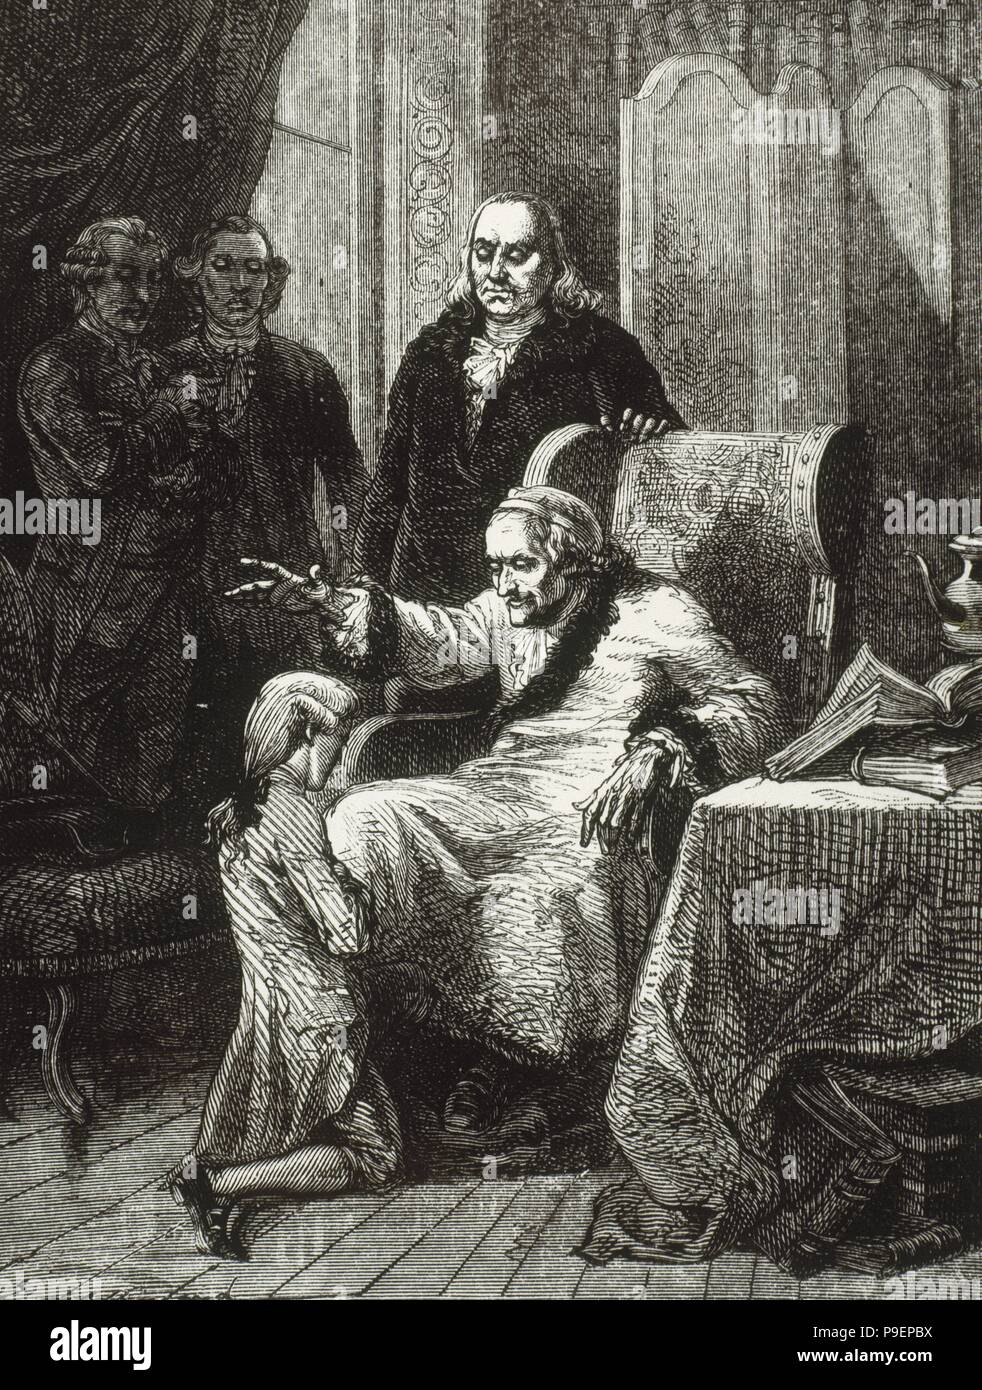 Voltaire (Franc ois-Marie Arouet) (1694-1778). French writer of The Enlightenment. Voltaire blesses Franklin's grandson. Engraving. Stock Photo